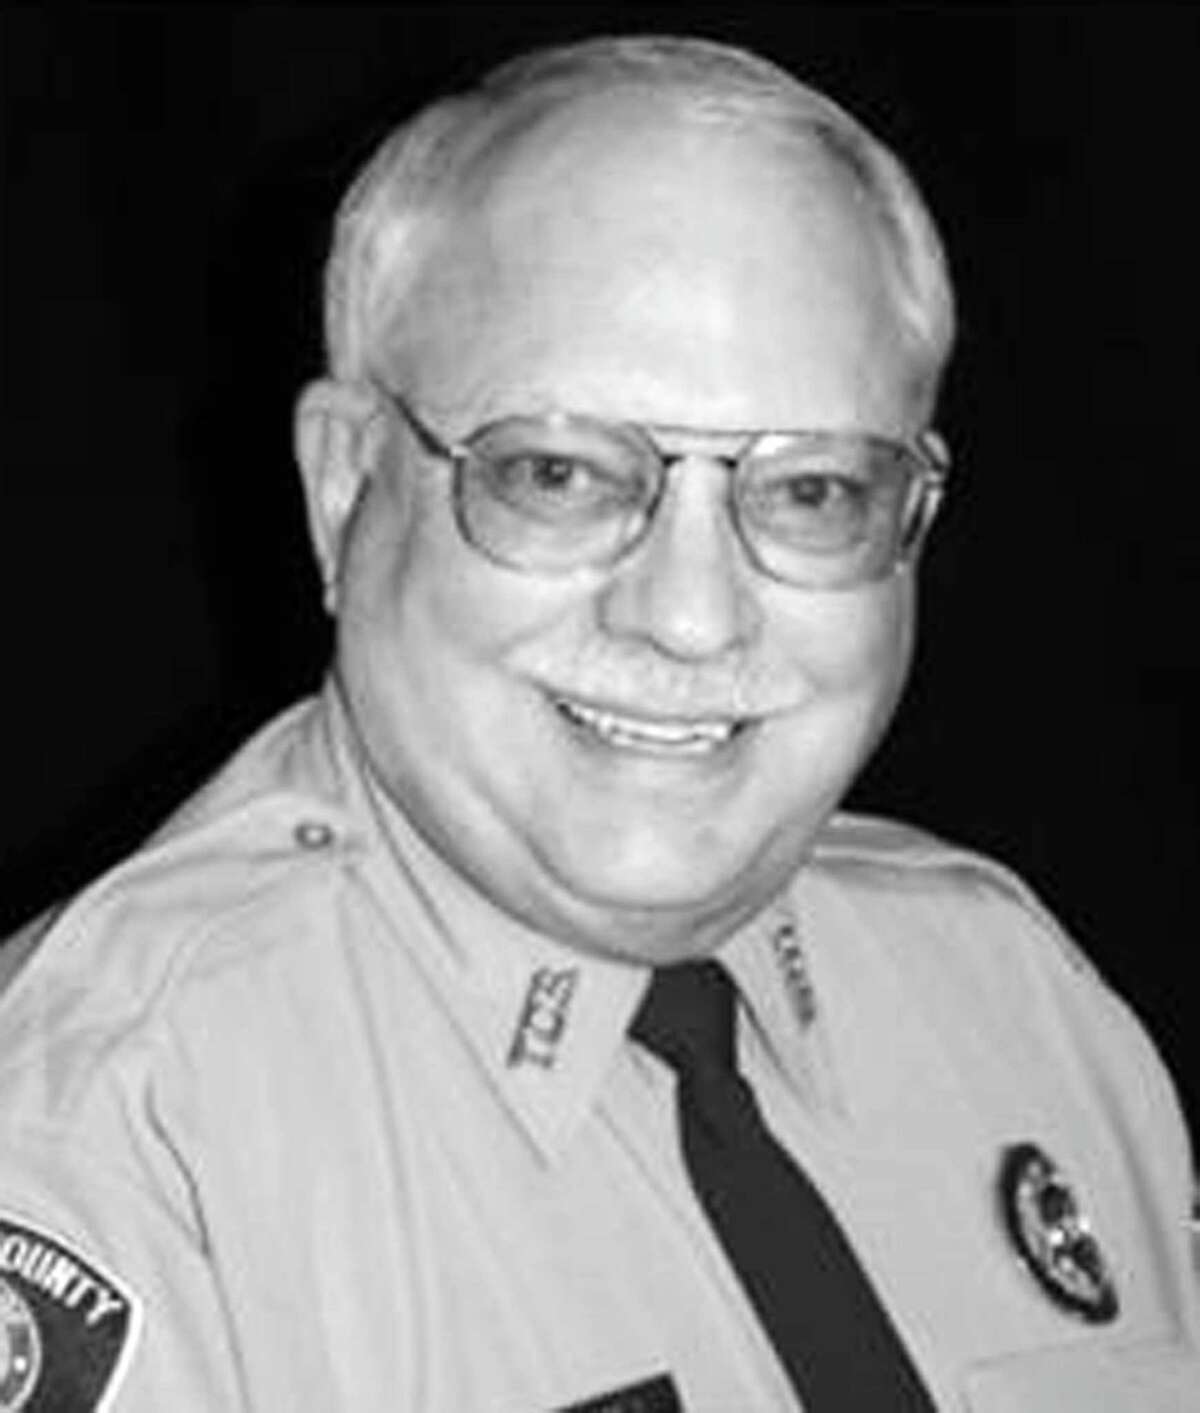 In this photo provided by the Tulsa County, Oklahoma, Sheriff's Office is Tulsa County reserve deputy Robert Bates. Police say Bates, a 73-year-old white reserve deputy, thought he was holding a stun gun, not his handgun, when he fired at 44-year-old Eric Harris in an April 2 incident. Harris, who is black, was treated by medics at the scene and died in a Tulsa hospital. (Tulsa County Sheriff's Office via AP)